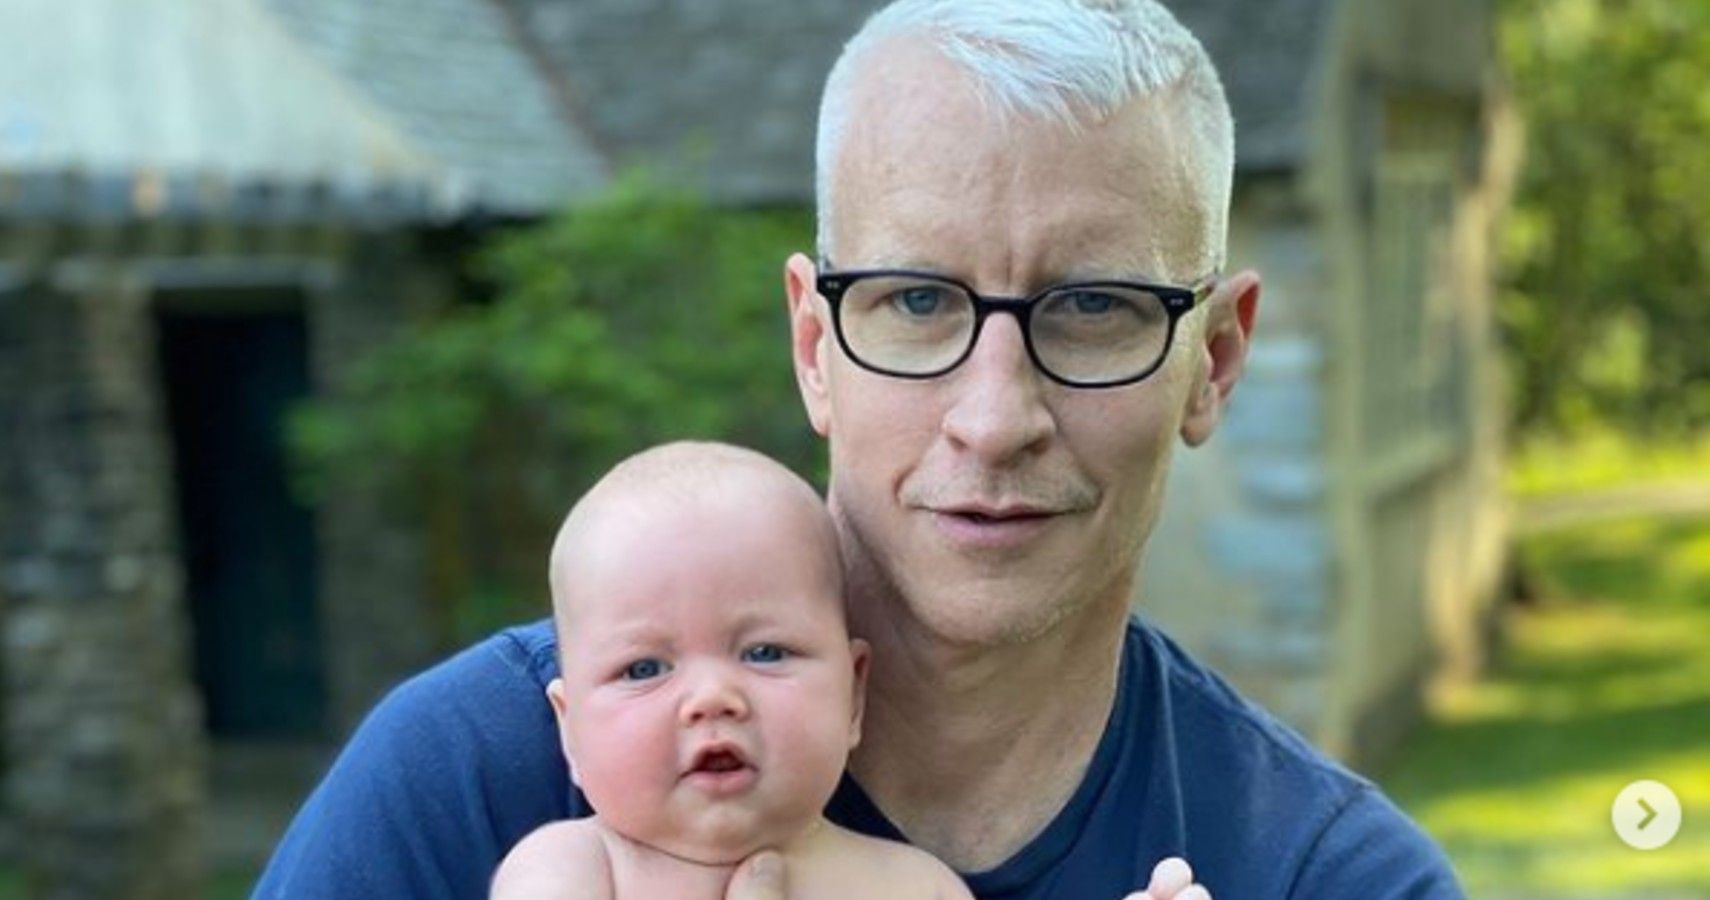 Anderson Cooper's Son Wyatt Voted PEOPLE's Cutest Baby Of 2020